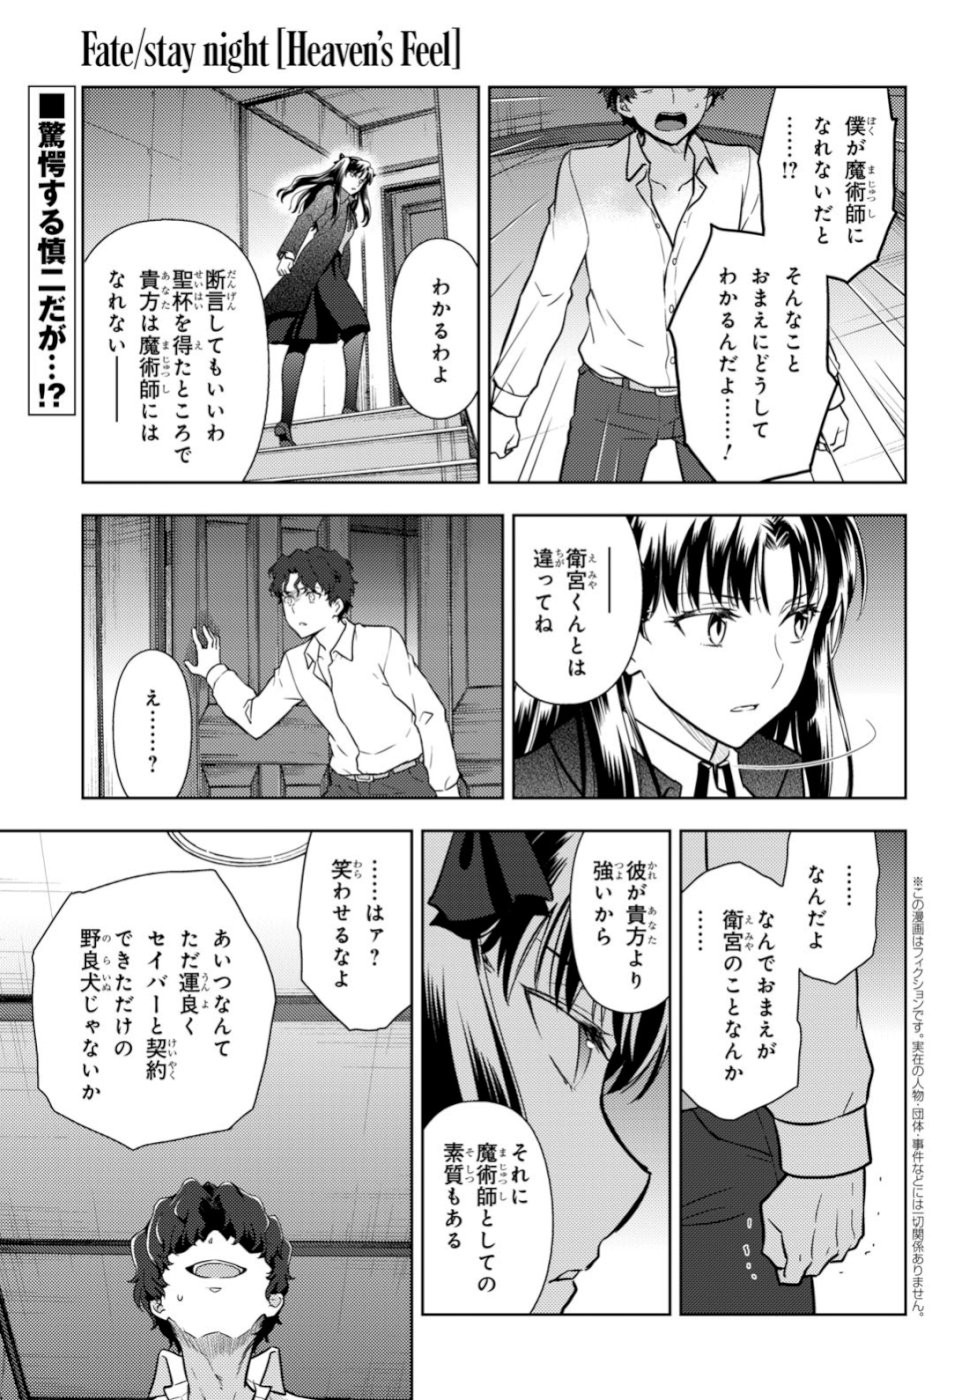 Fate/Stay night Heaven's Feel - Chapter 52 - Page 1